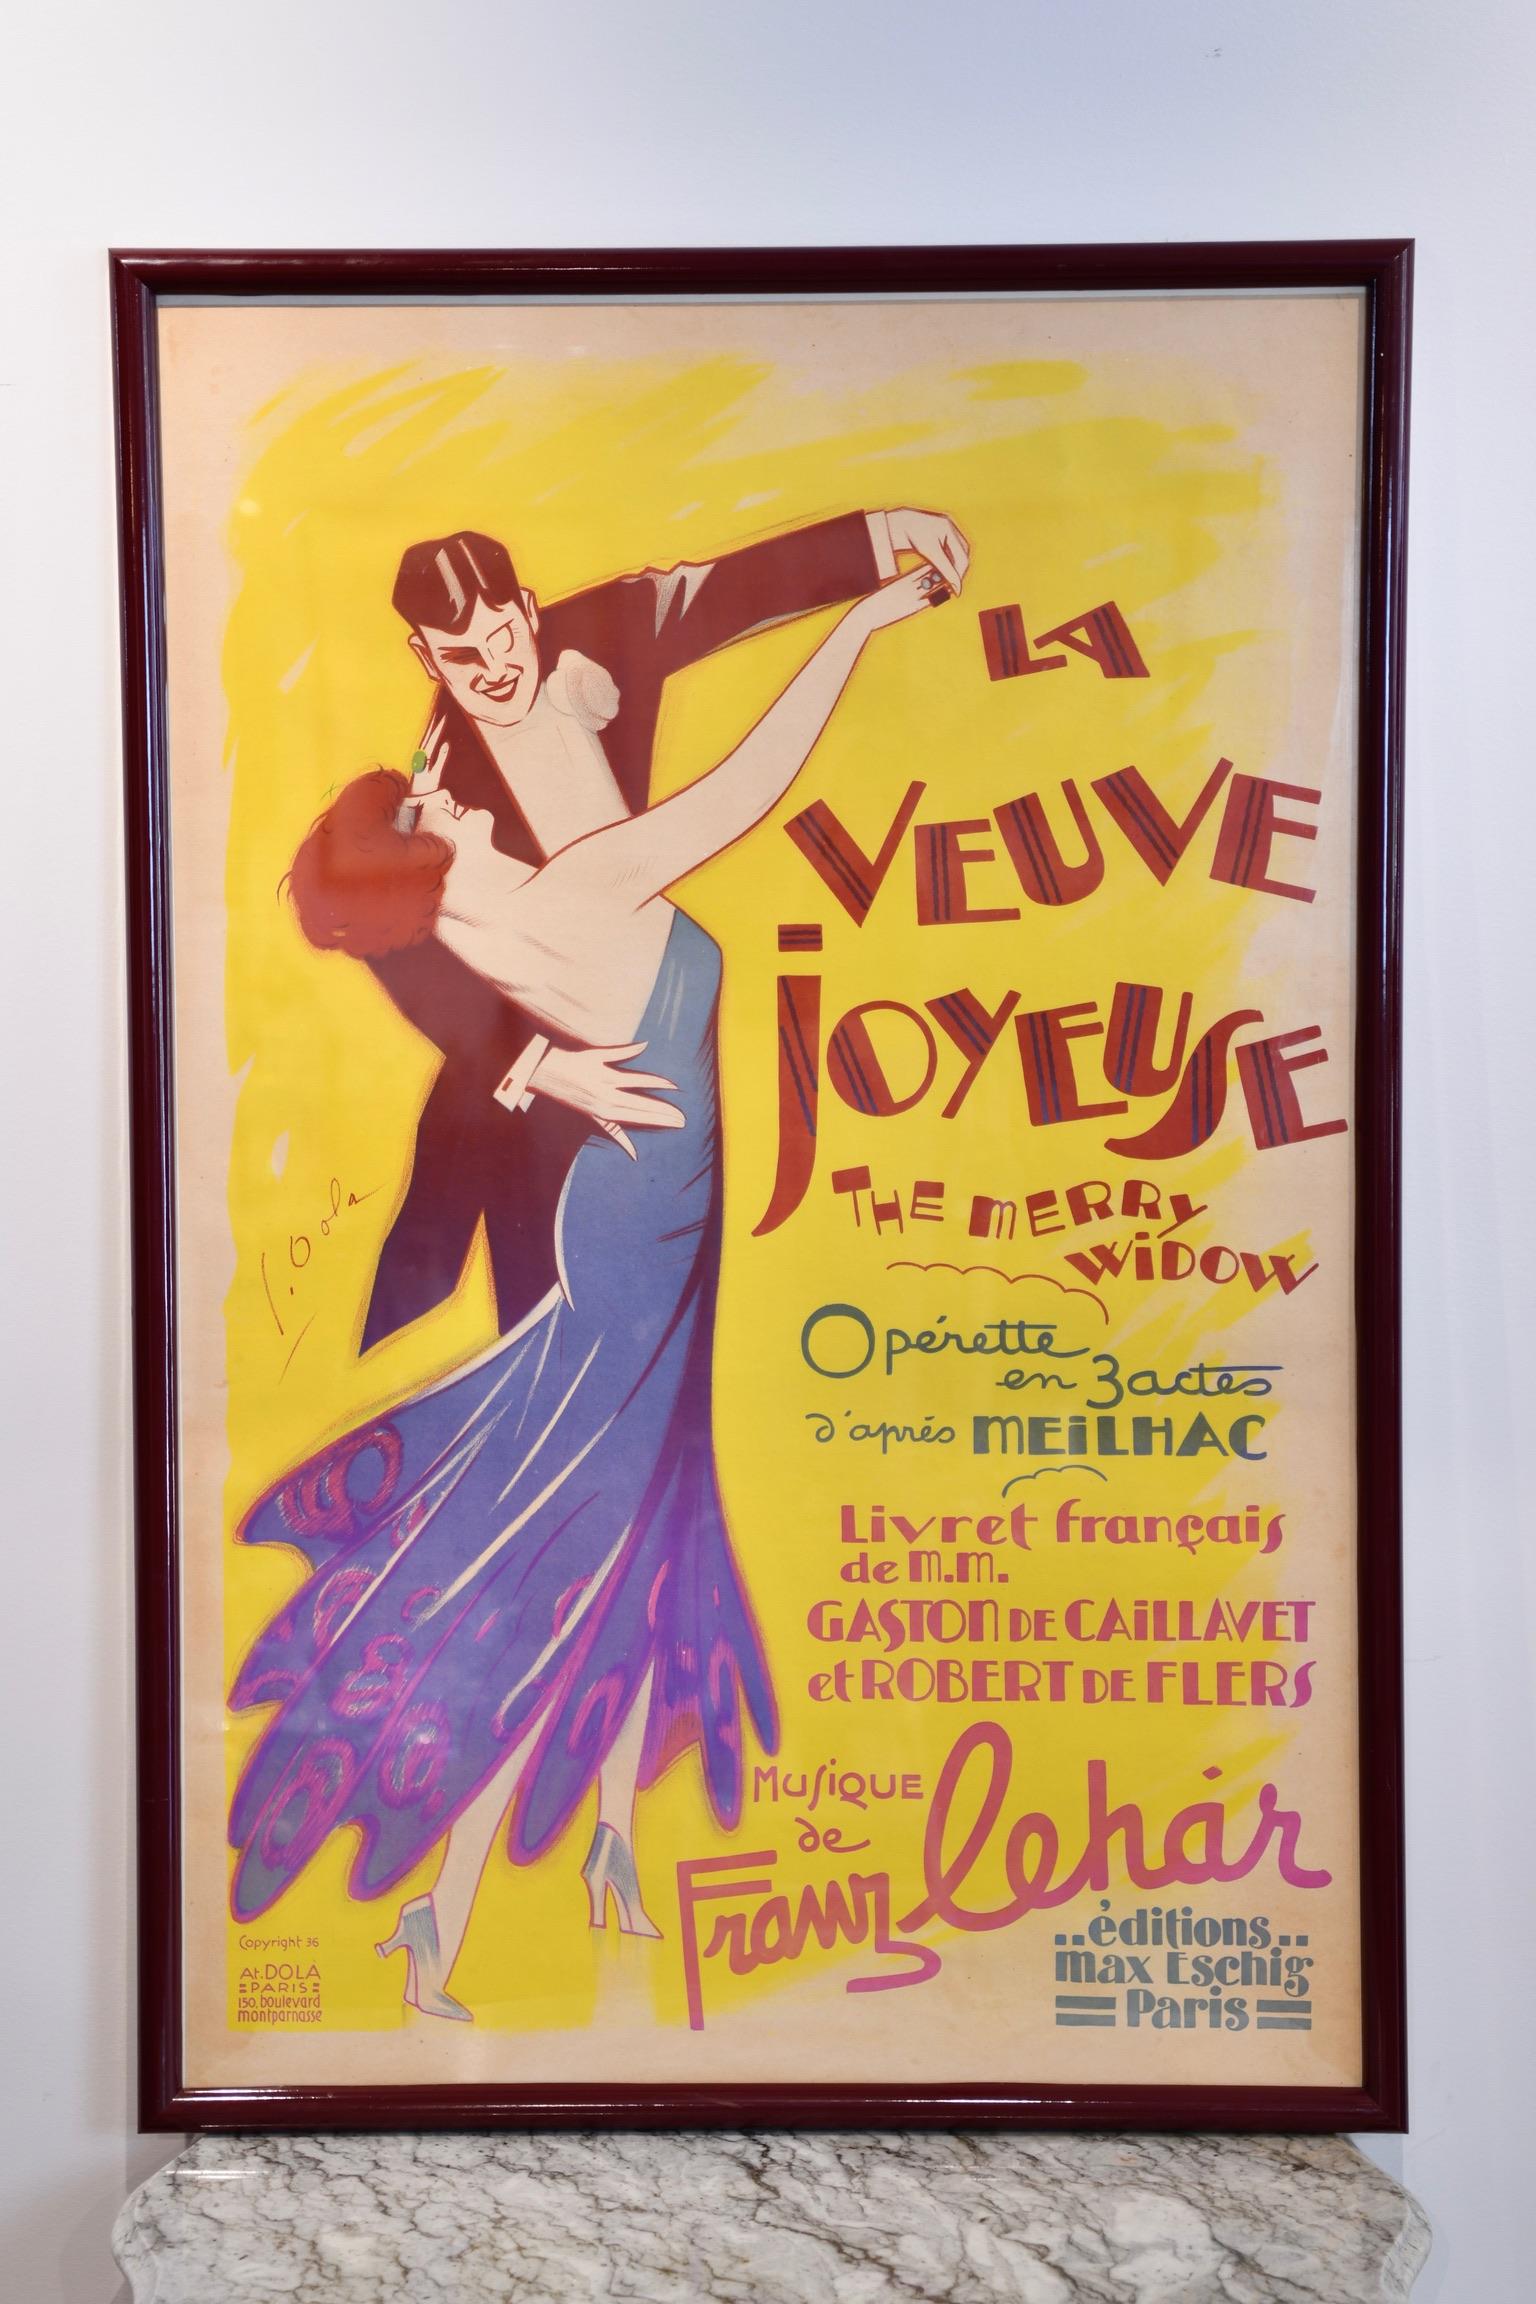 Georges Dola (1872 -1950) original poster for the Merry Widow operetta, dated for 1936, Max Eschig Paris. Dimensions: 51